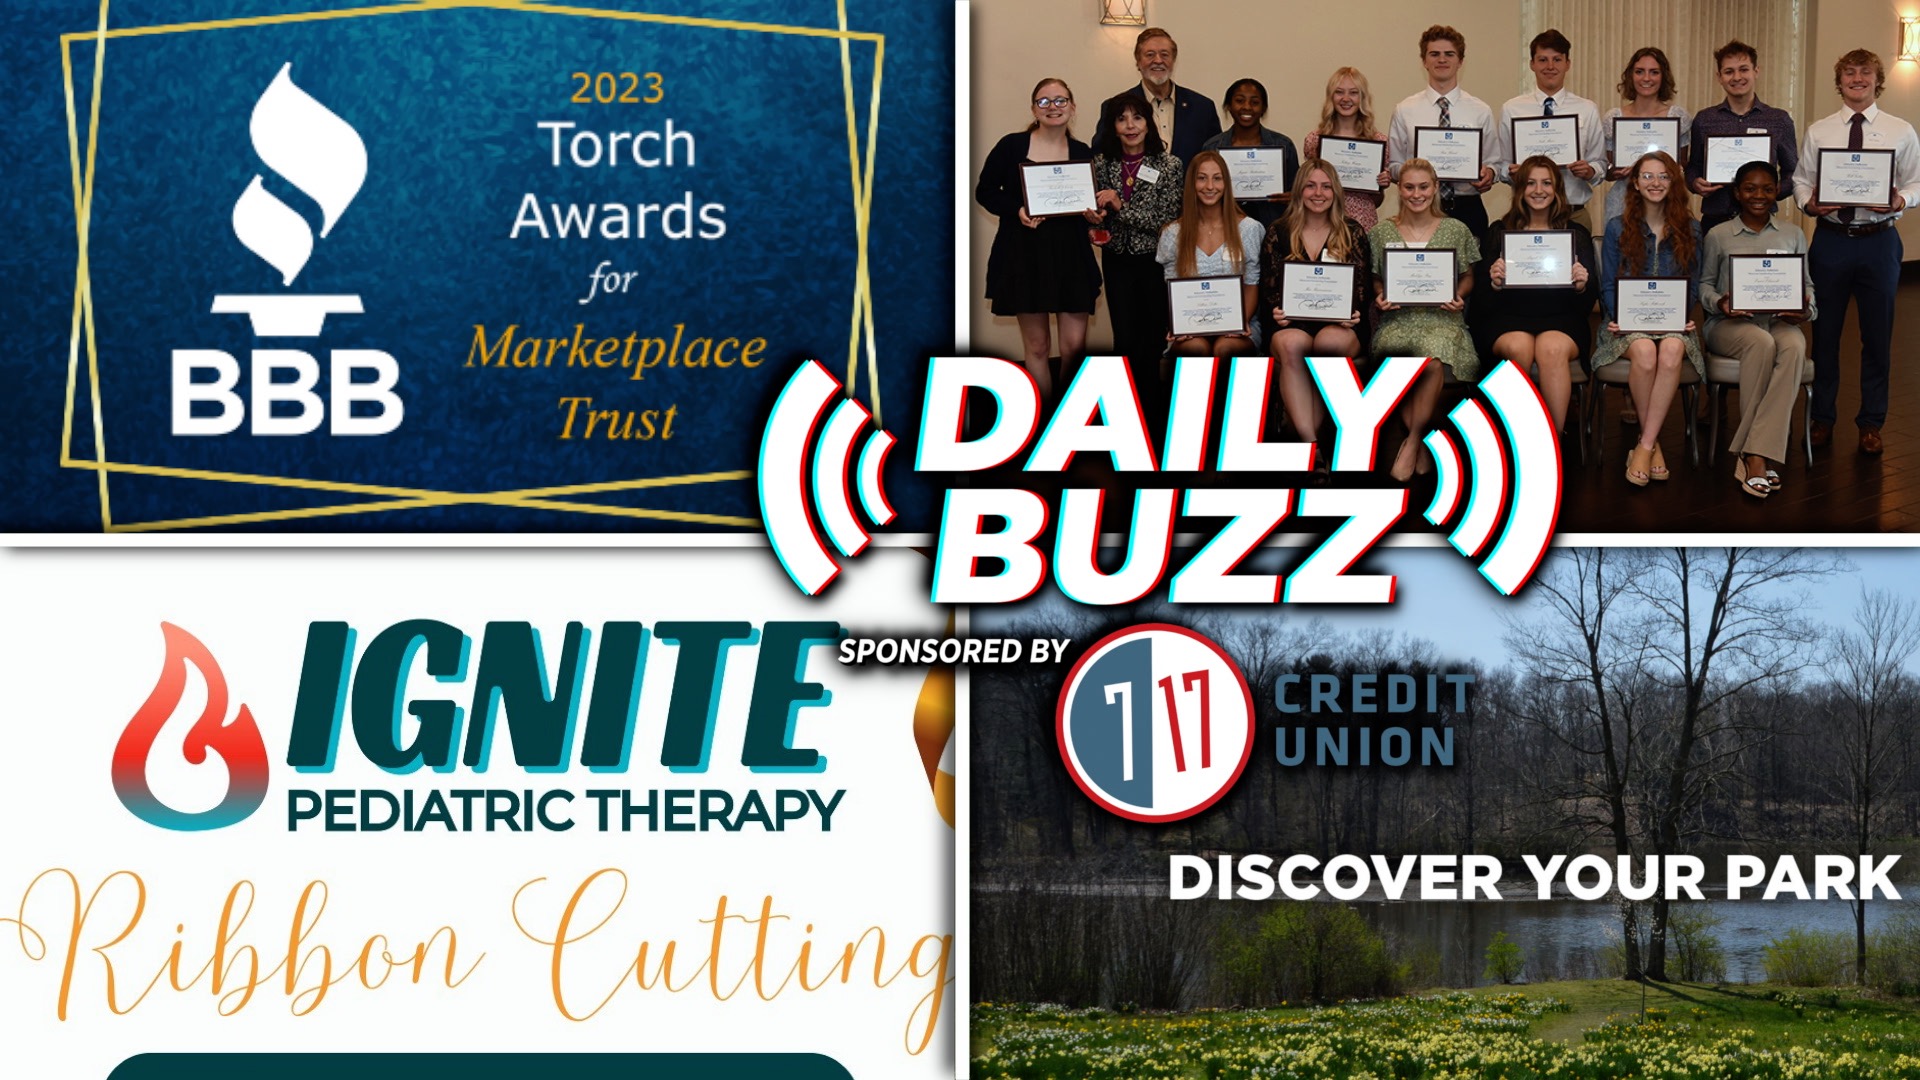 BBB Torch Awards, Chill-Can Project Hearing, Ribbon Cuttings and More This Week